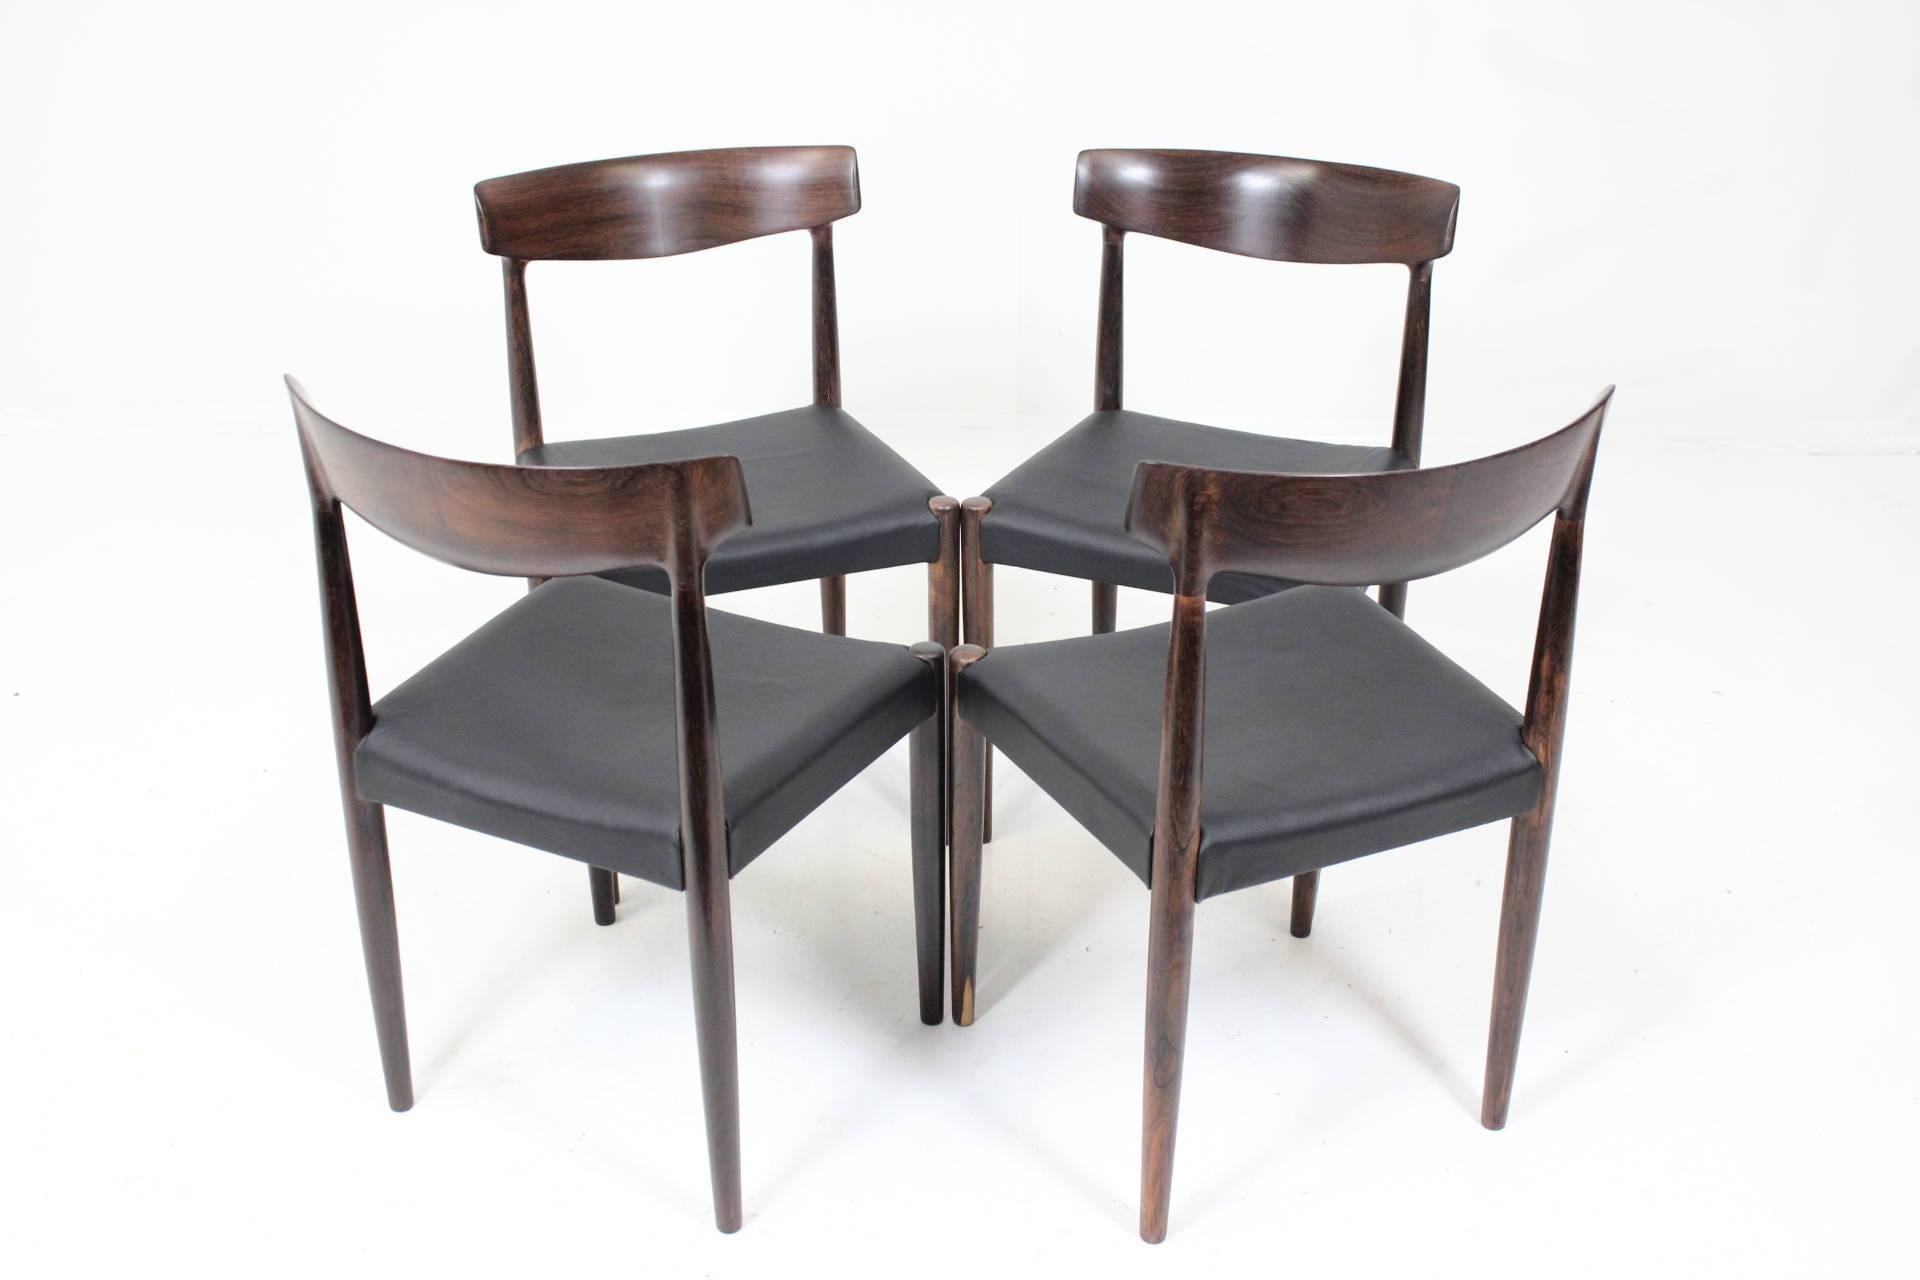 Scandinavian Modern Set of Four Dining Palisander Chairs Attributed to Knud Faerch